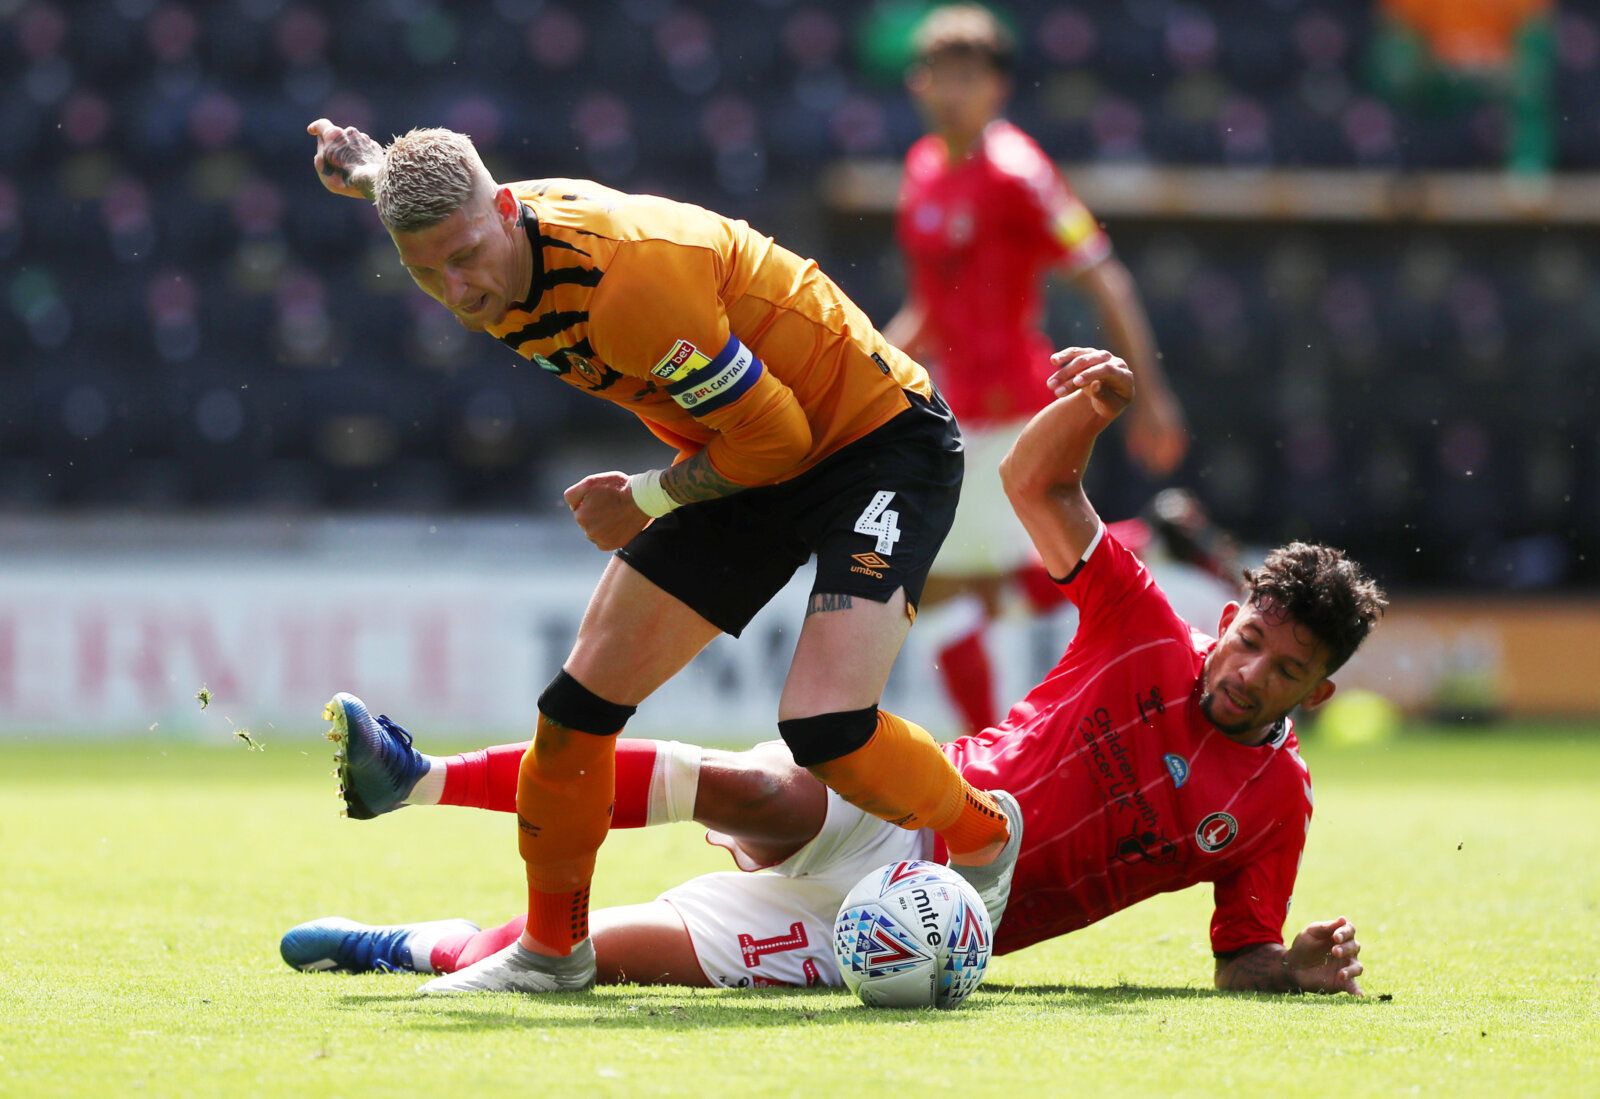 Soccer Football - Championship - Hull City v Charlton Athletic - KCOM Stadium, Hull, Britain - June 20, 2020  Hull's Jordy de Wijs in action with Charlton's Macauley Bonne, as play resumes behind closed doors following the outbreak of the coronavirus disease (COVID-19)  Action Images/Lee Smith  EDITORIAL USE ONLY. No use with unauthorized audio, video, data, fixture lists, club/league logos or 